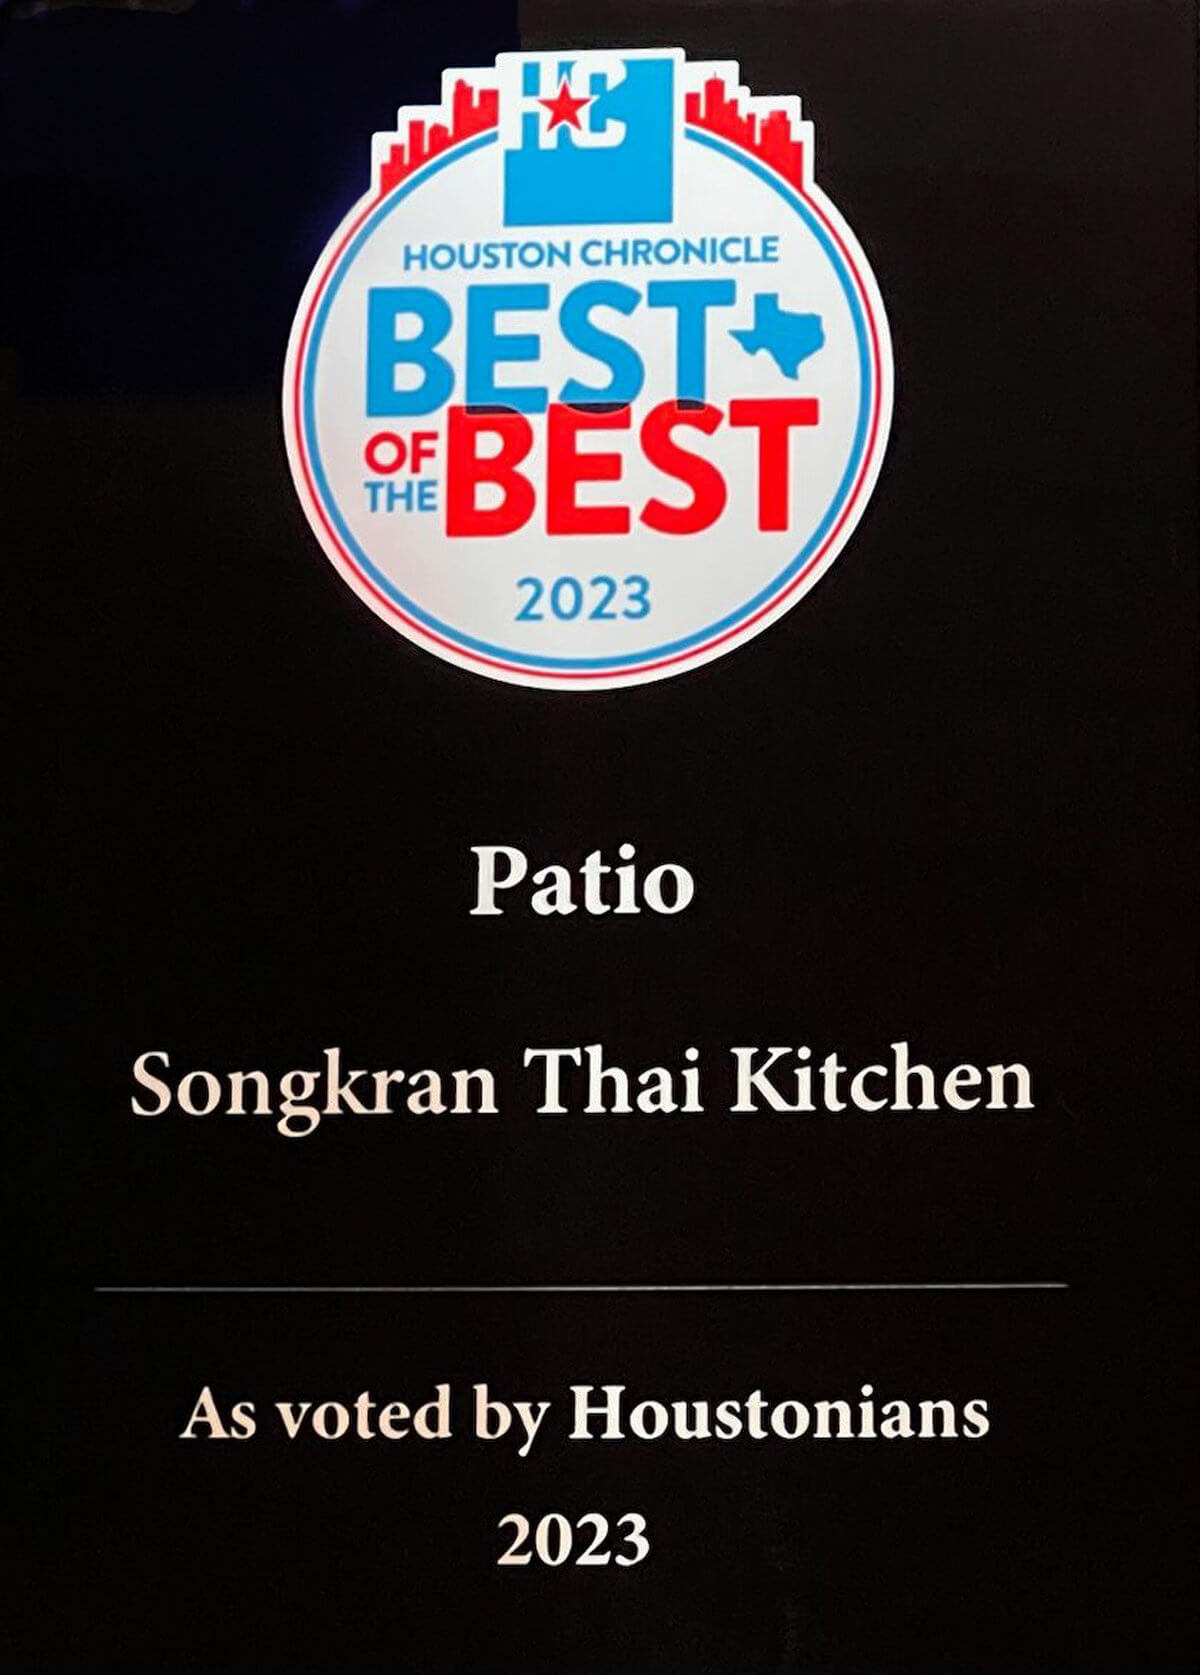 2023 Reward for best patio, voted by Houston Chronicle